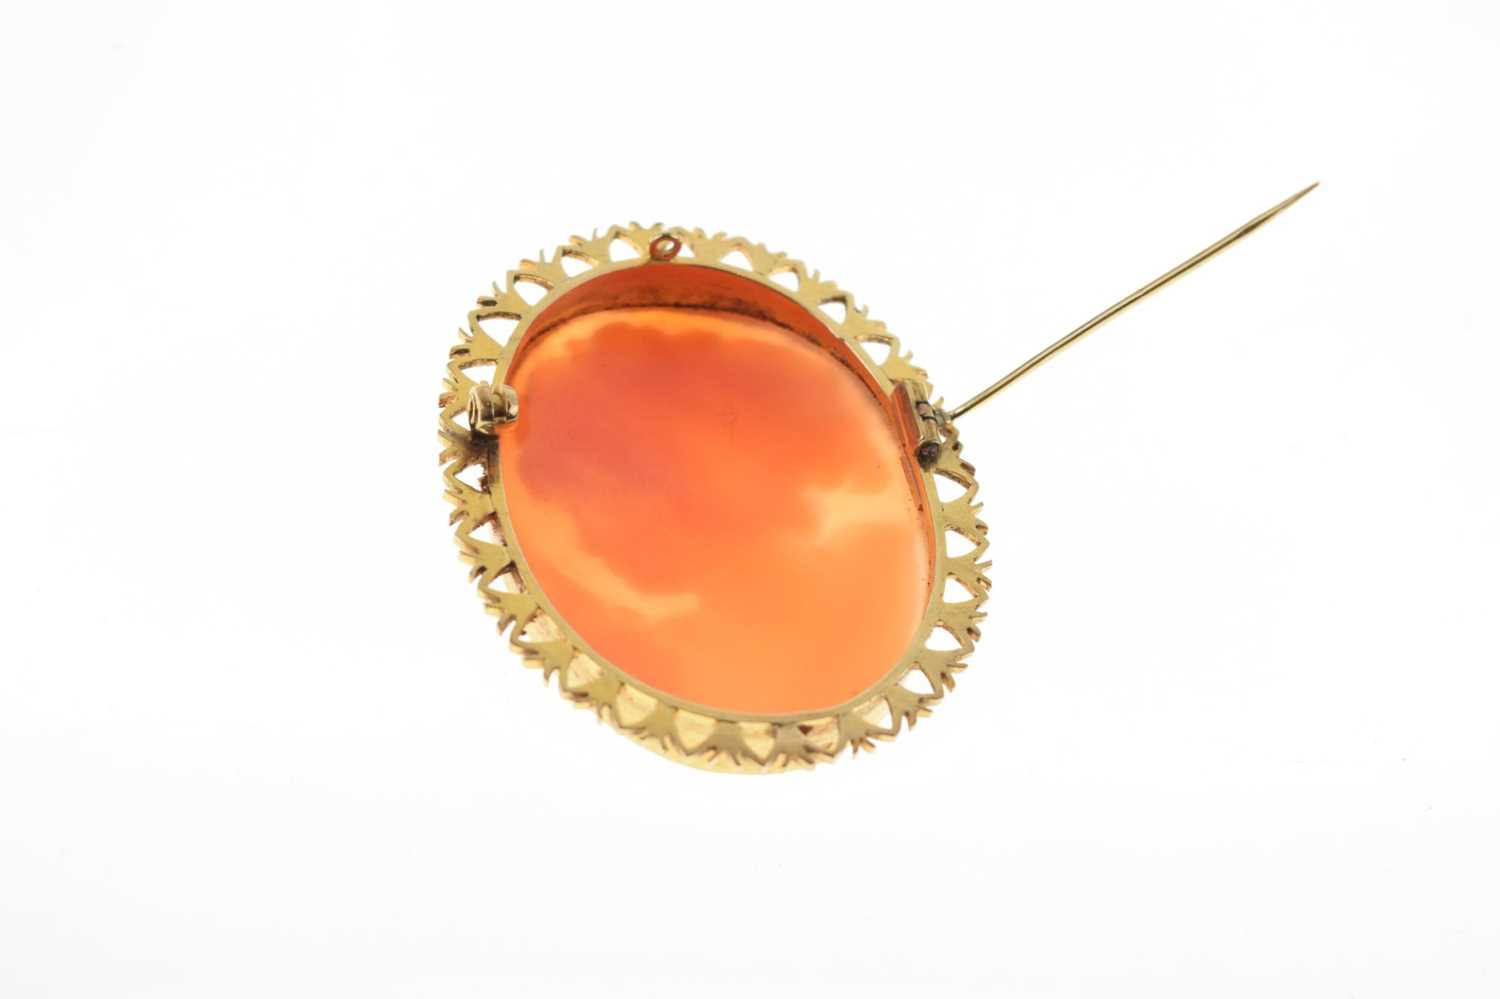 Modern 9ct gold cameo brooch - Image 6 of 7